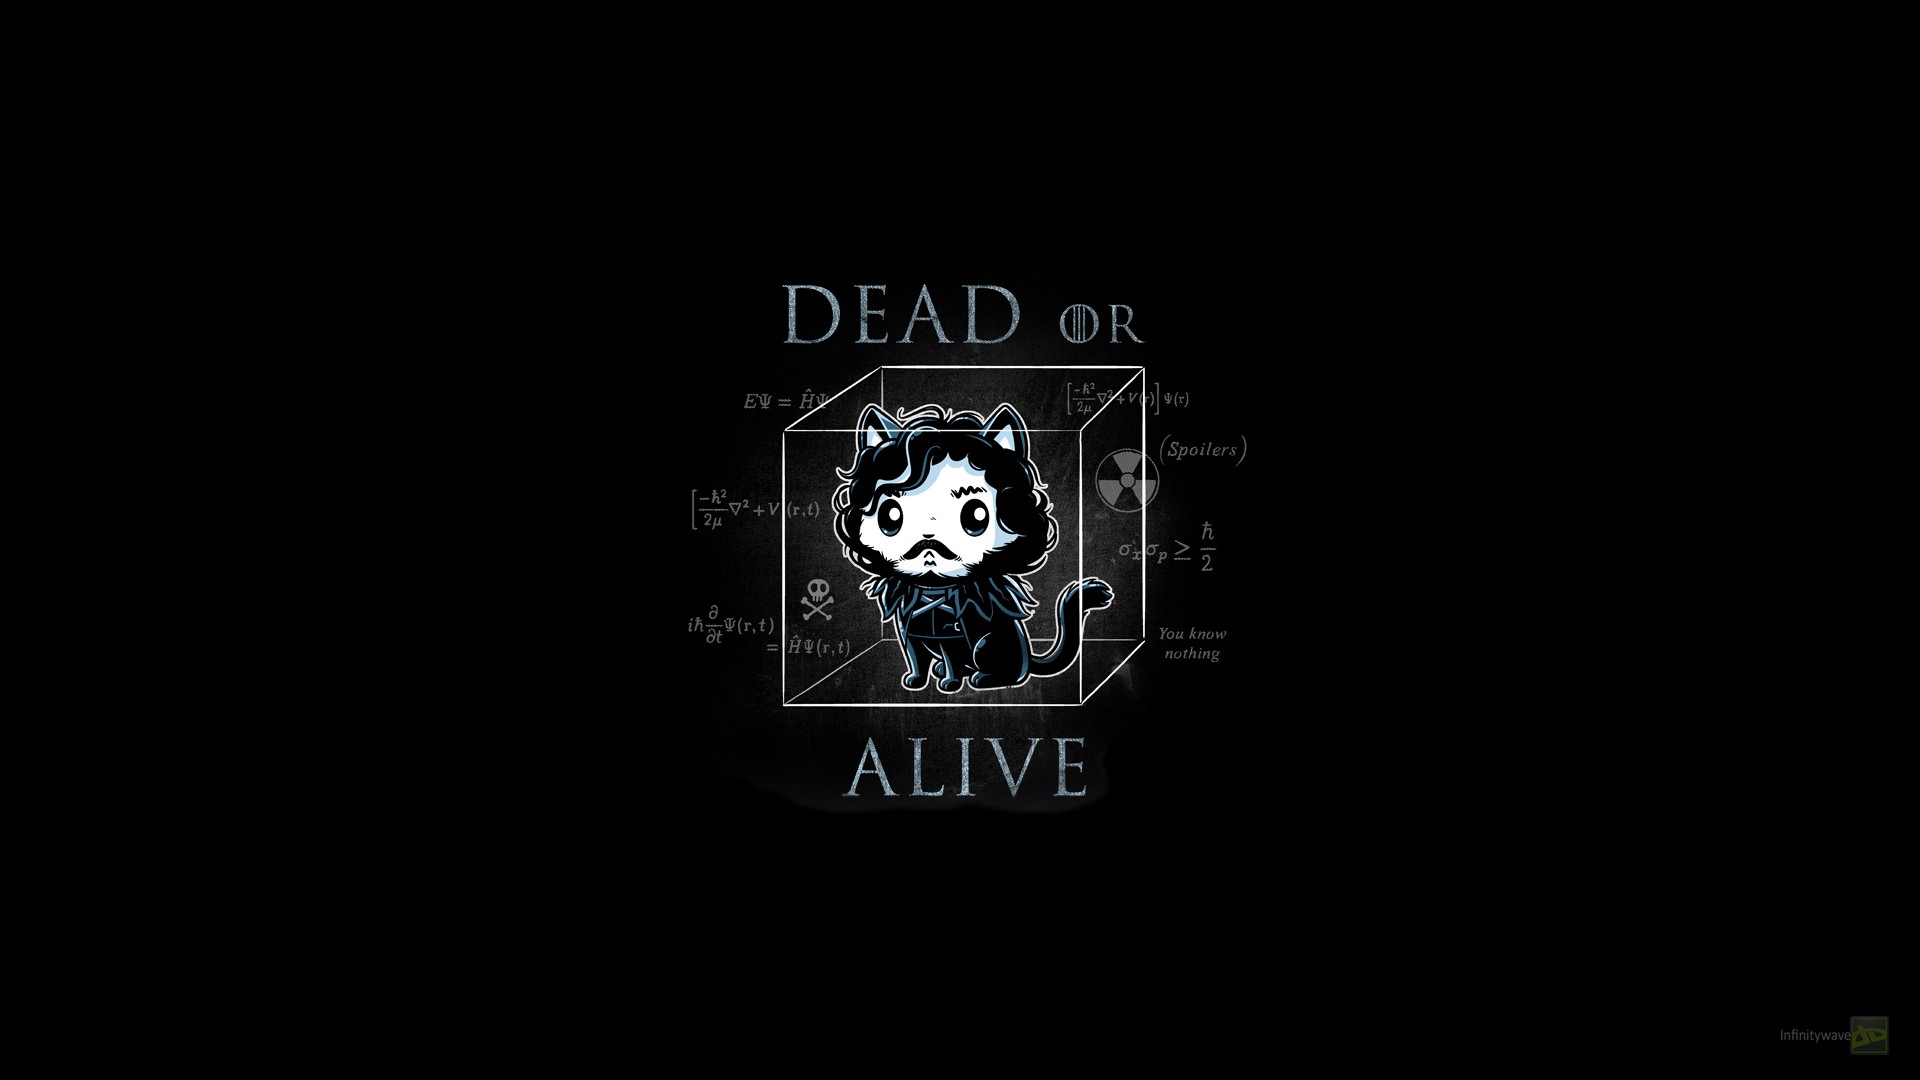 General 1920x1080 cats Game of Thrones Jon Snow artwork quantum theory humor TV series fan art black background simple background